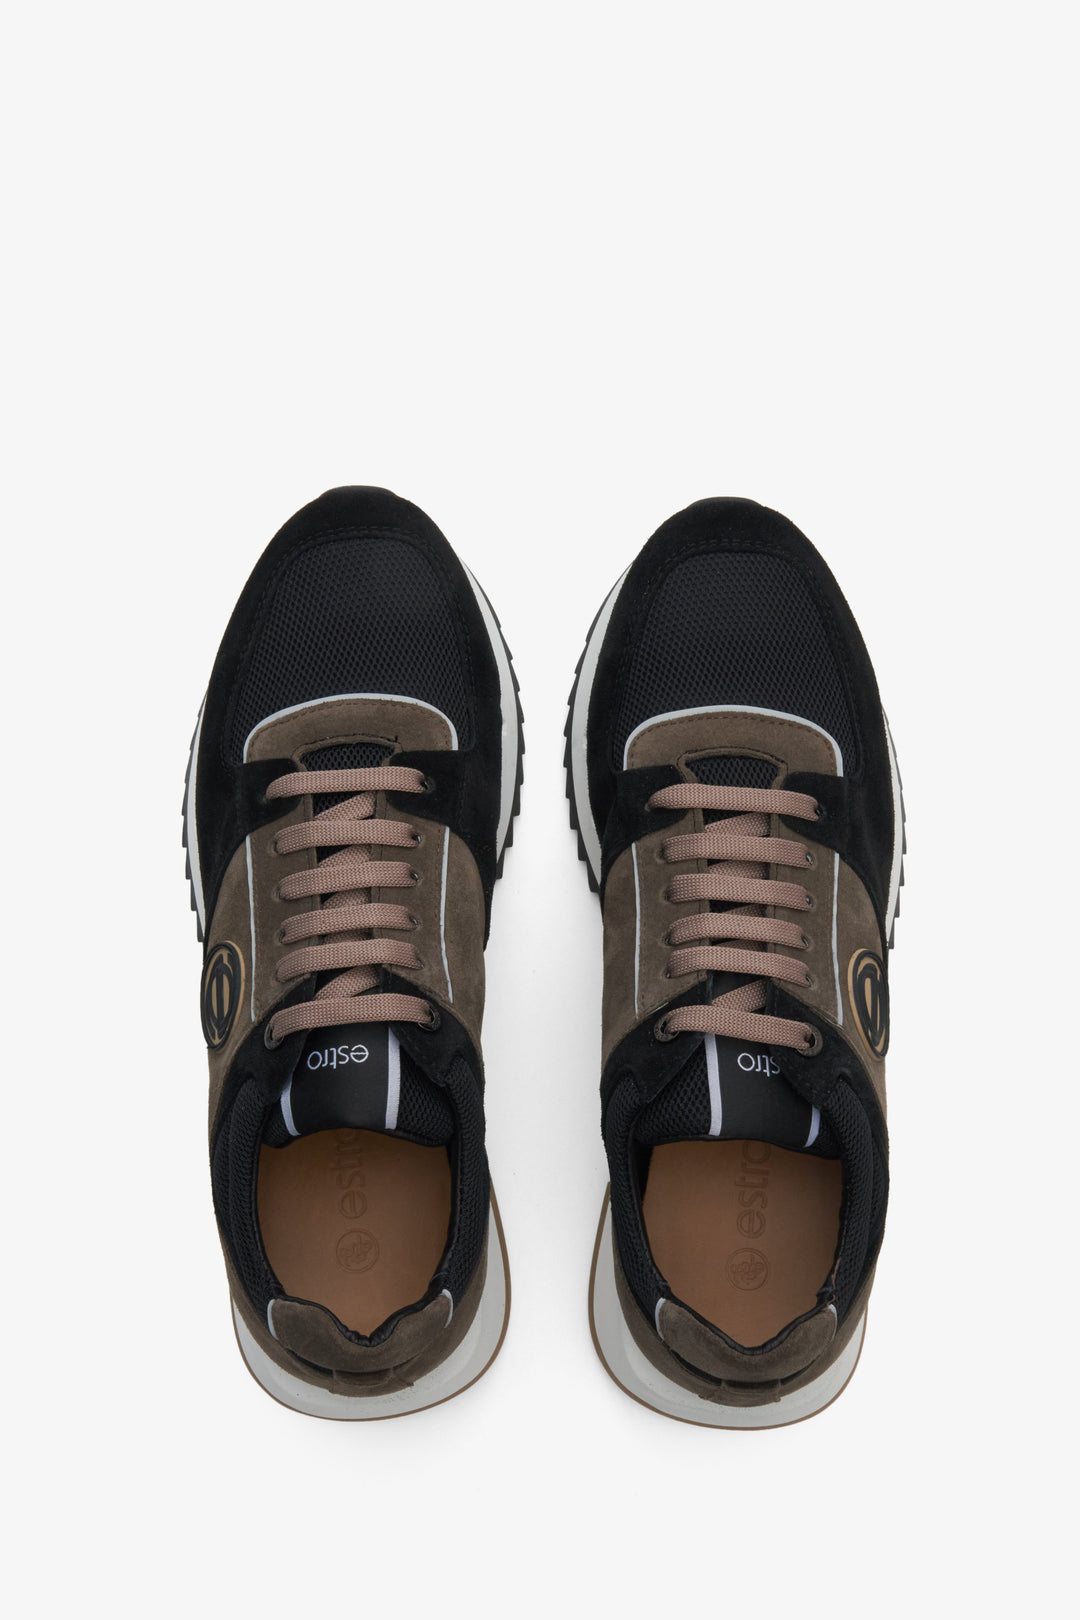 Men's black and brown sneakers made of velour - top view presentation of the footwear.